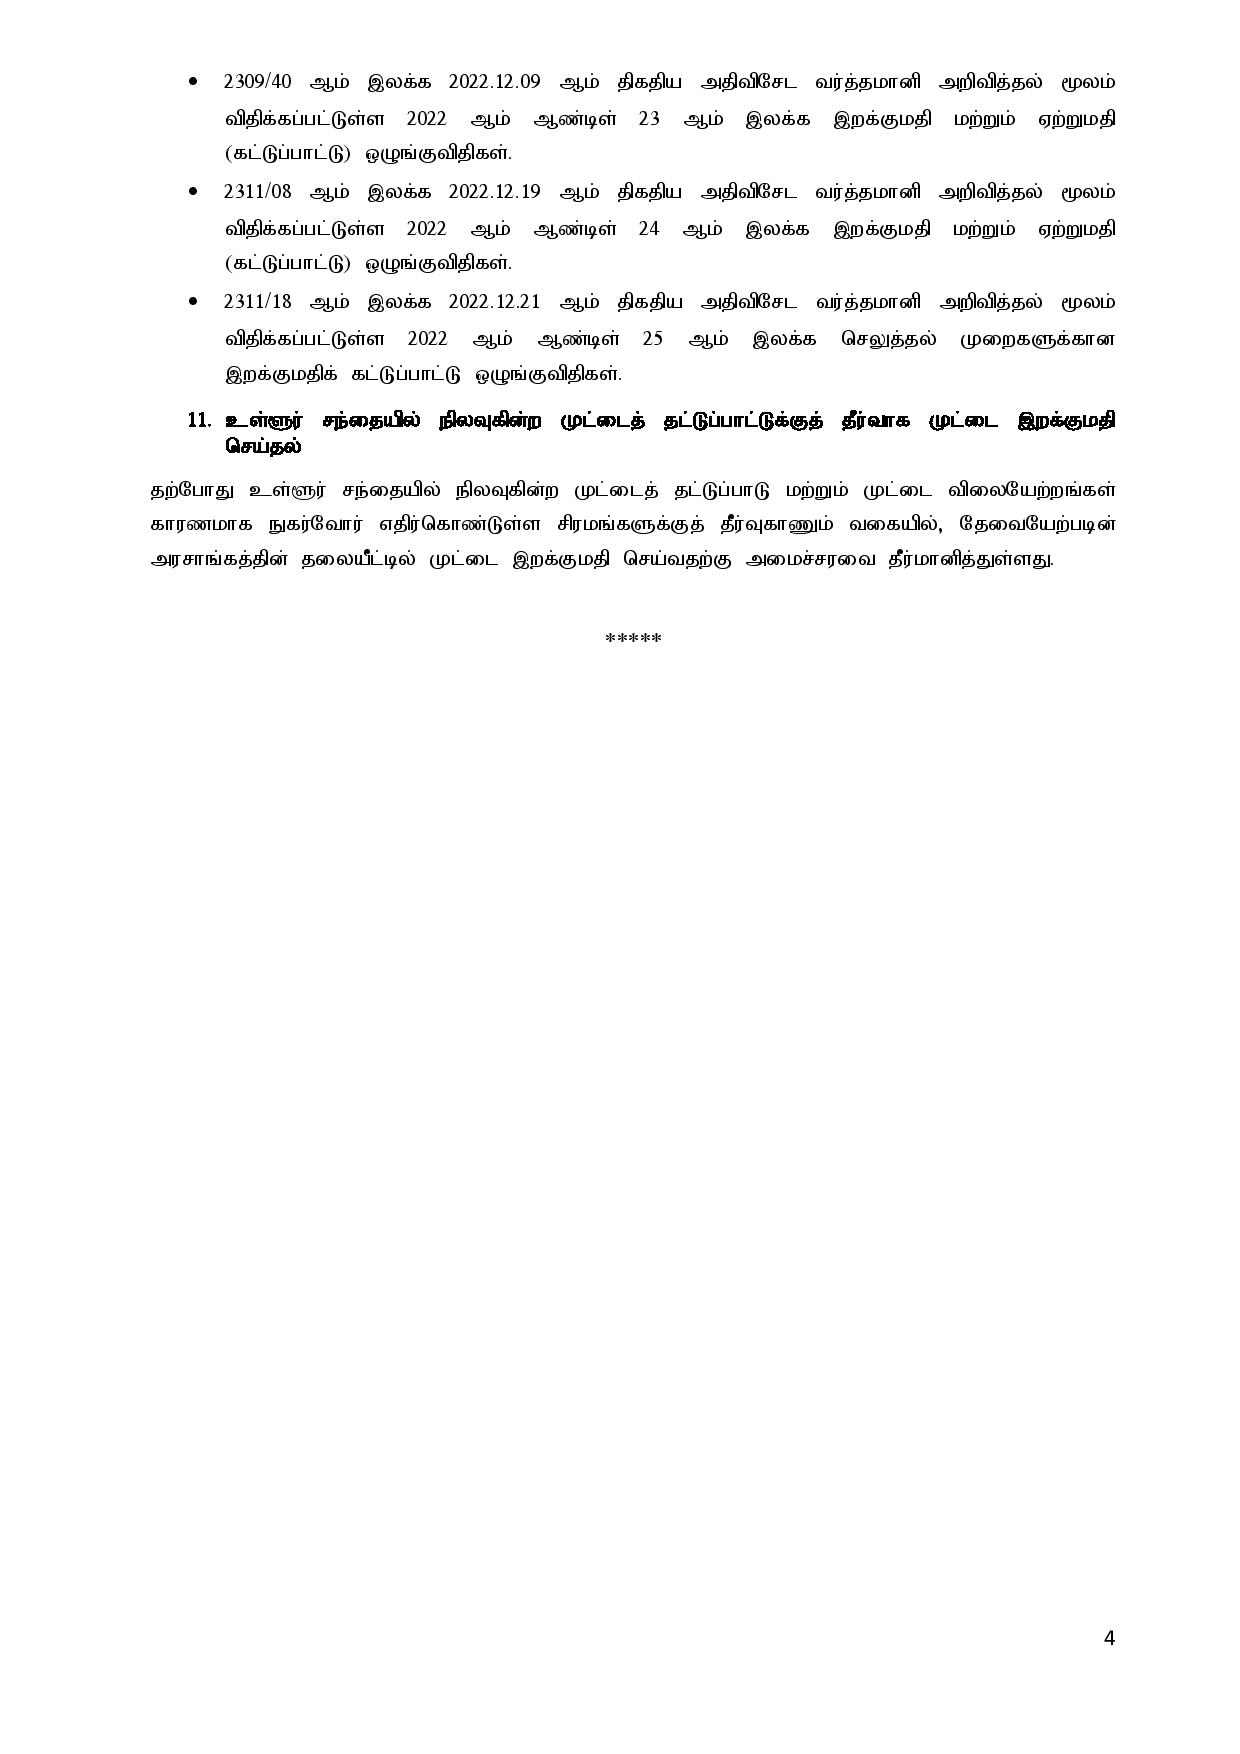 Cabinet Decisions on 02.01.2023 Tamil page 004